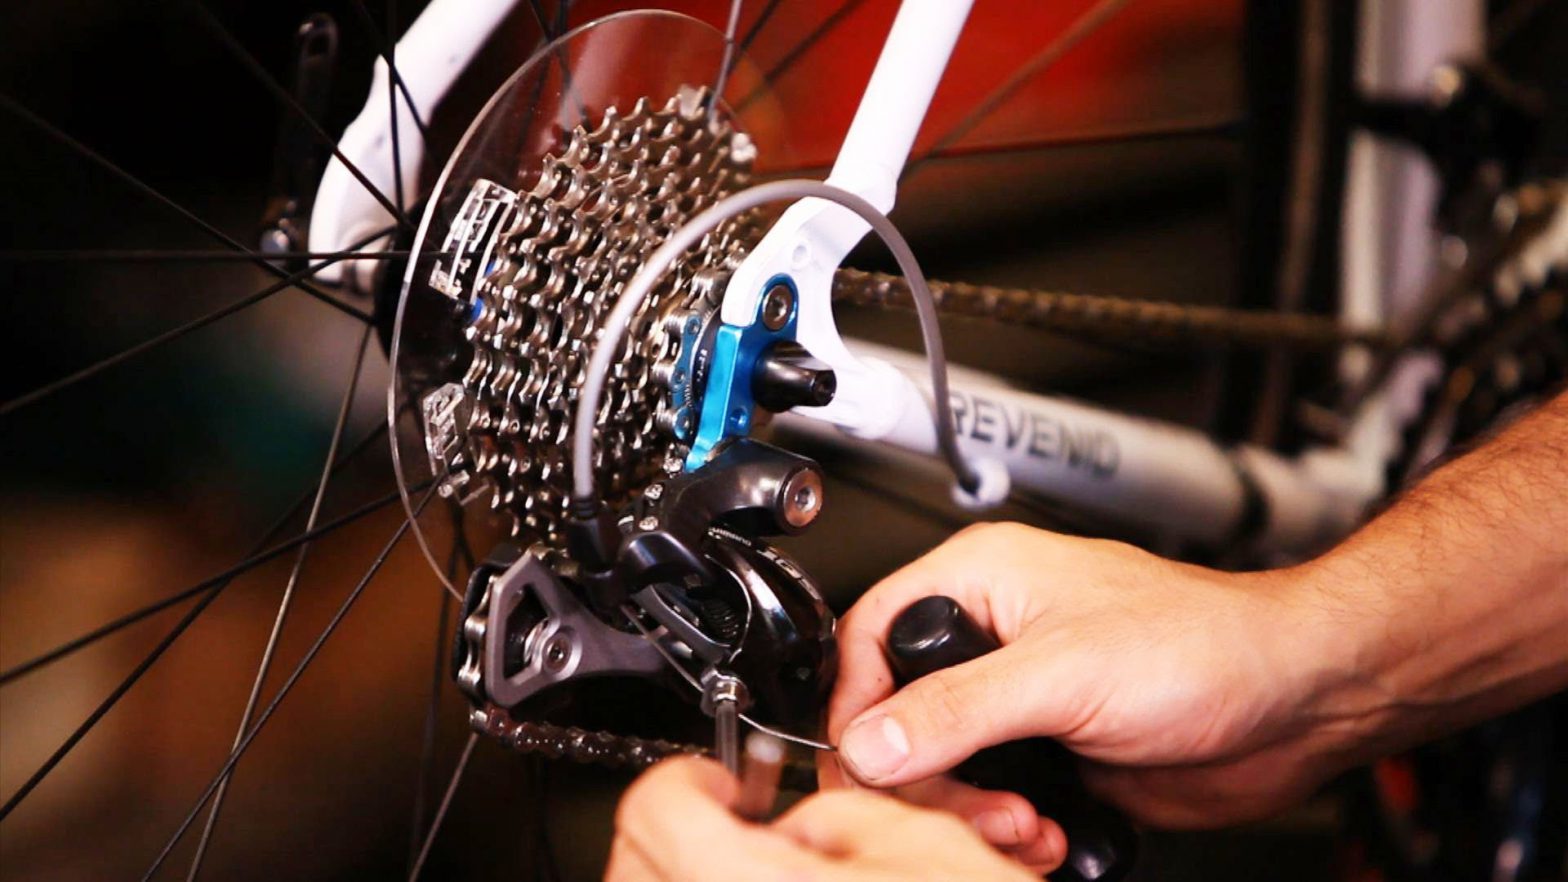 Ranking of the best bike chain scraps for 2020